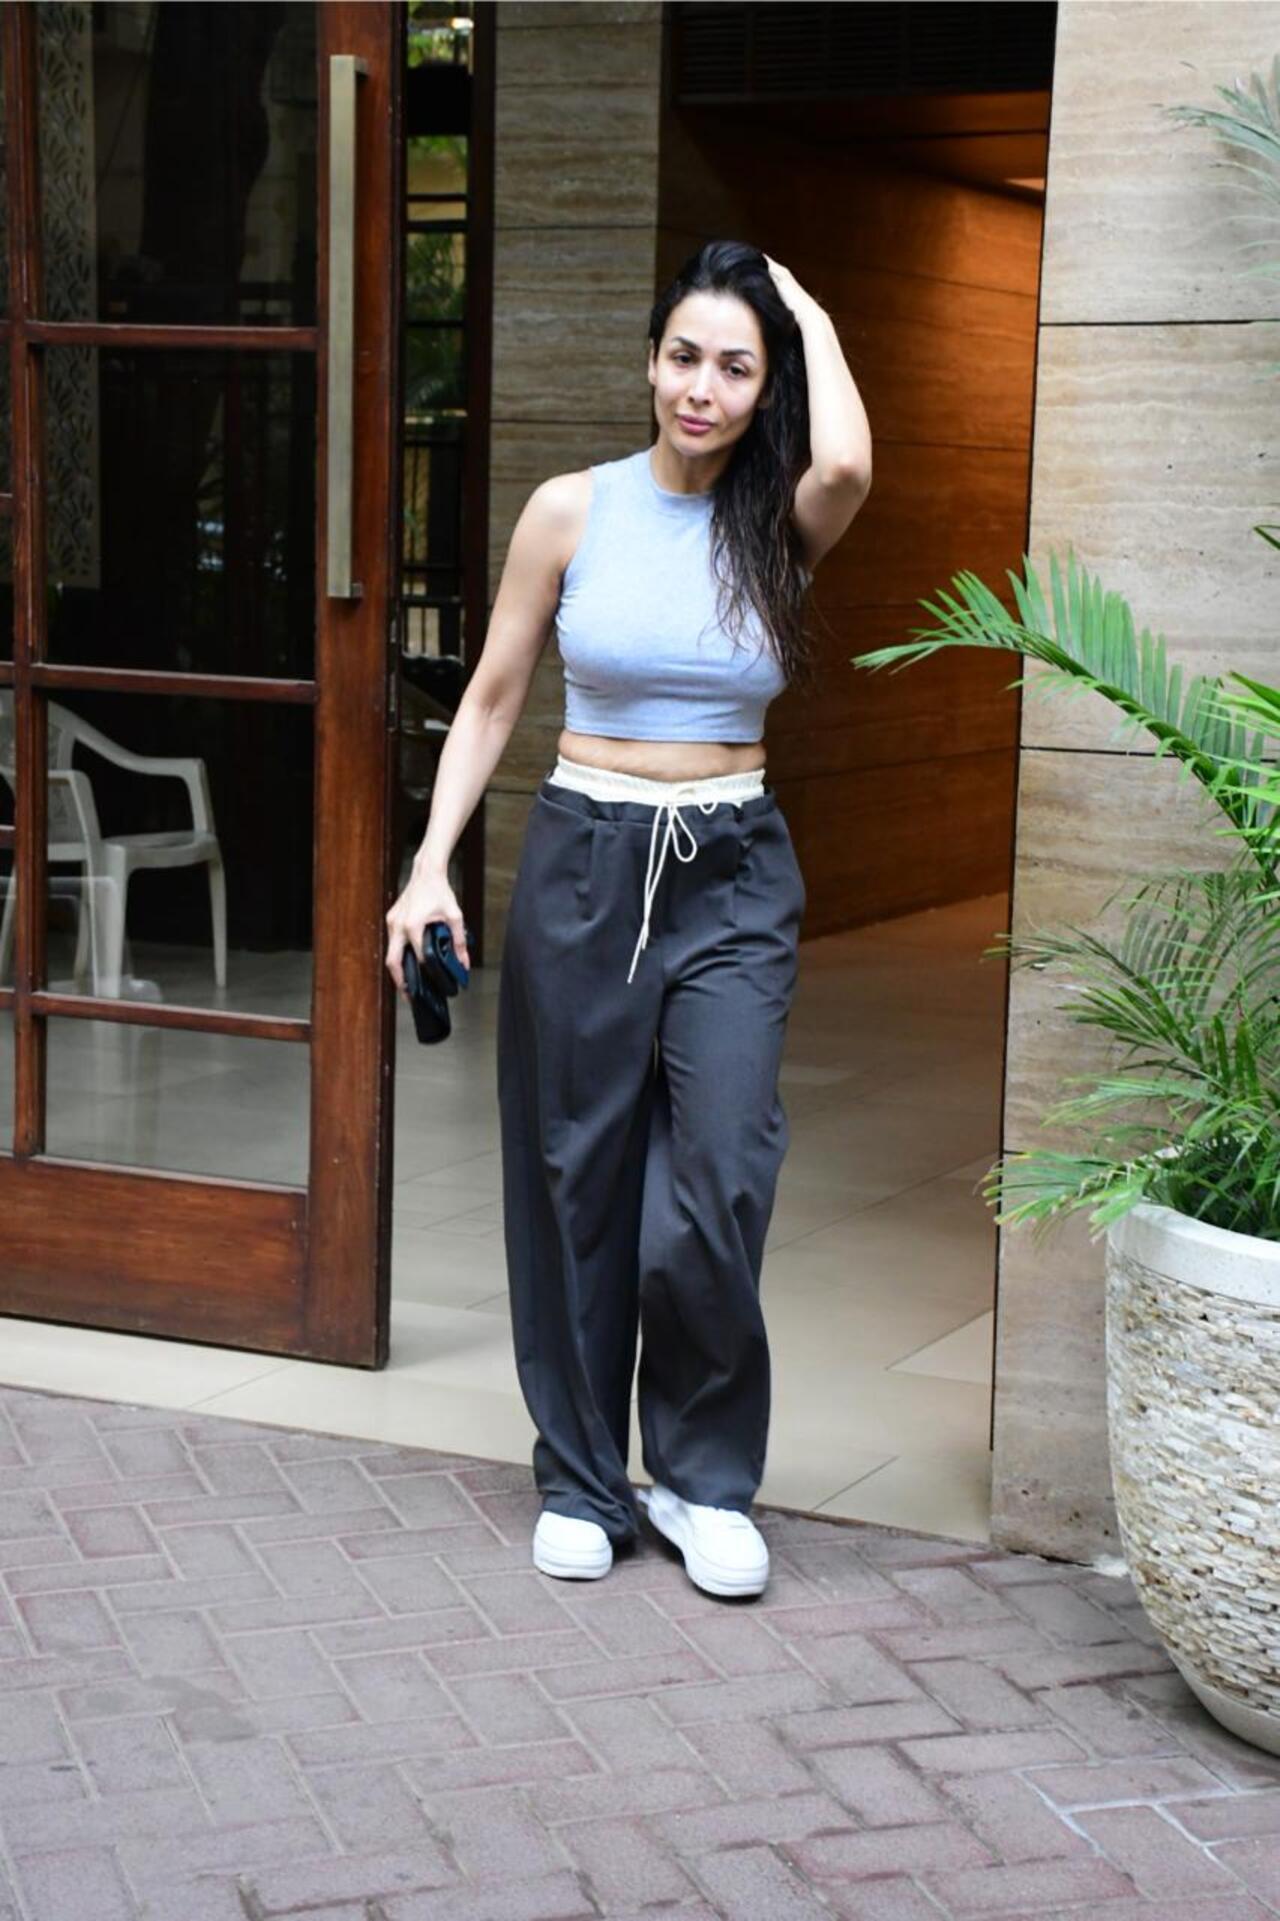 Malaika Arora was spotted outside her apartment on Tuesday